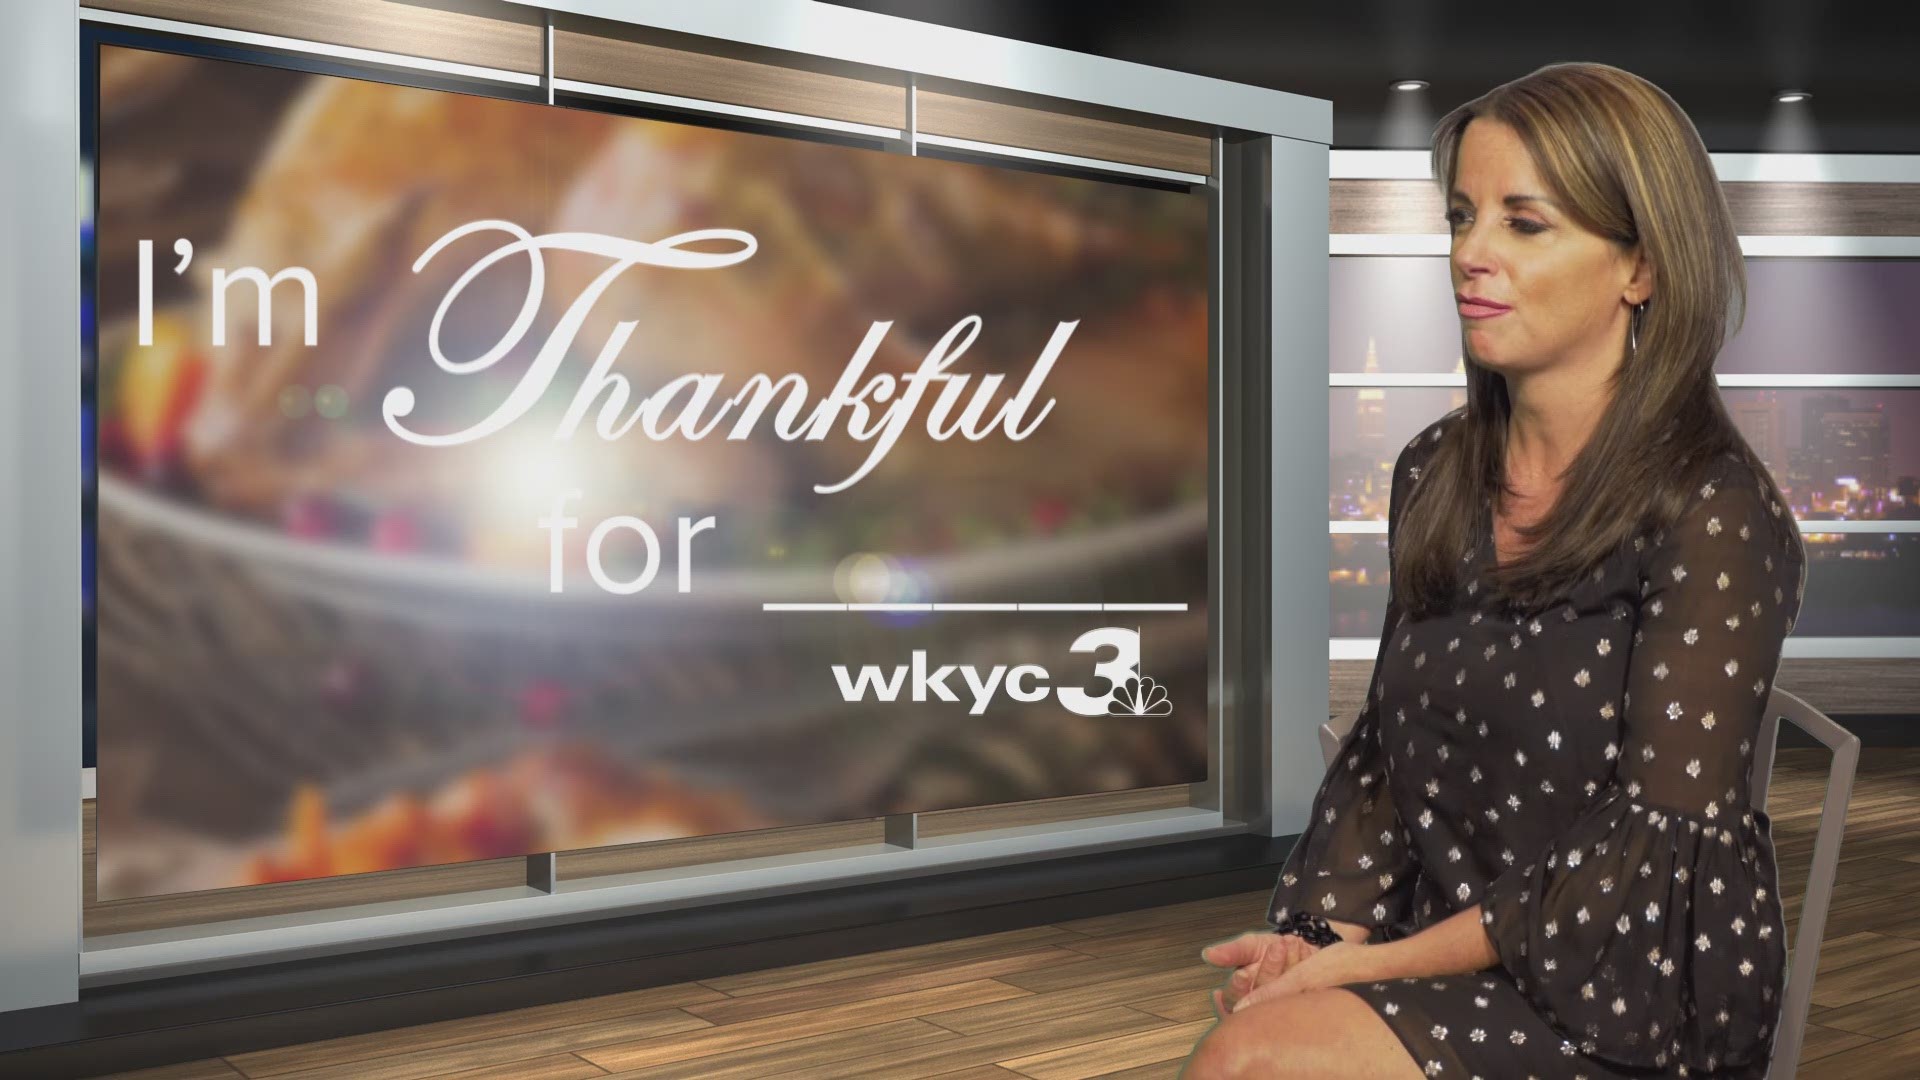 Meteorologist Hollie Strano tells us what she's thankful for.